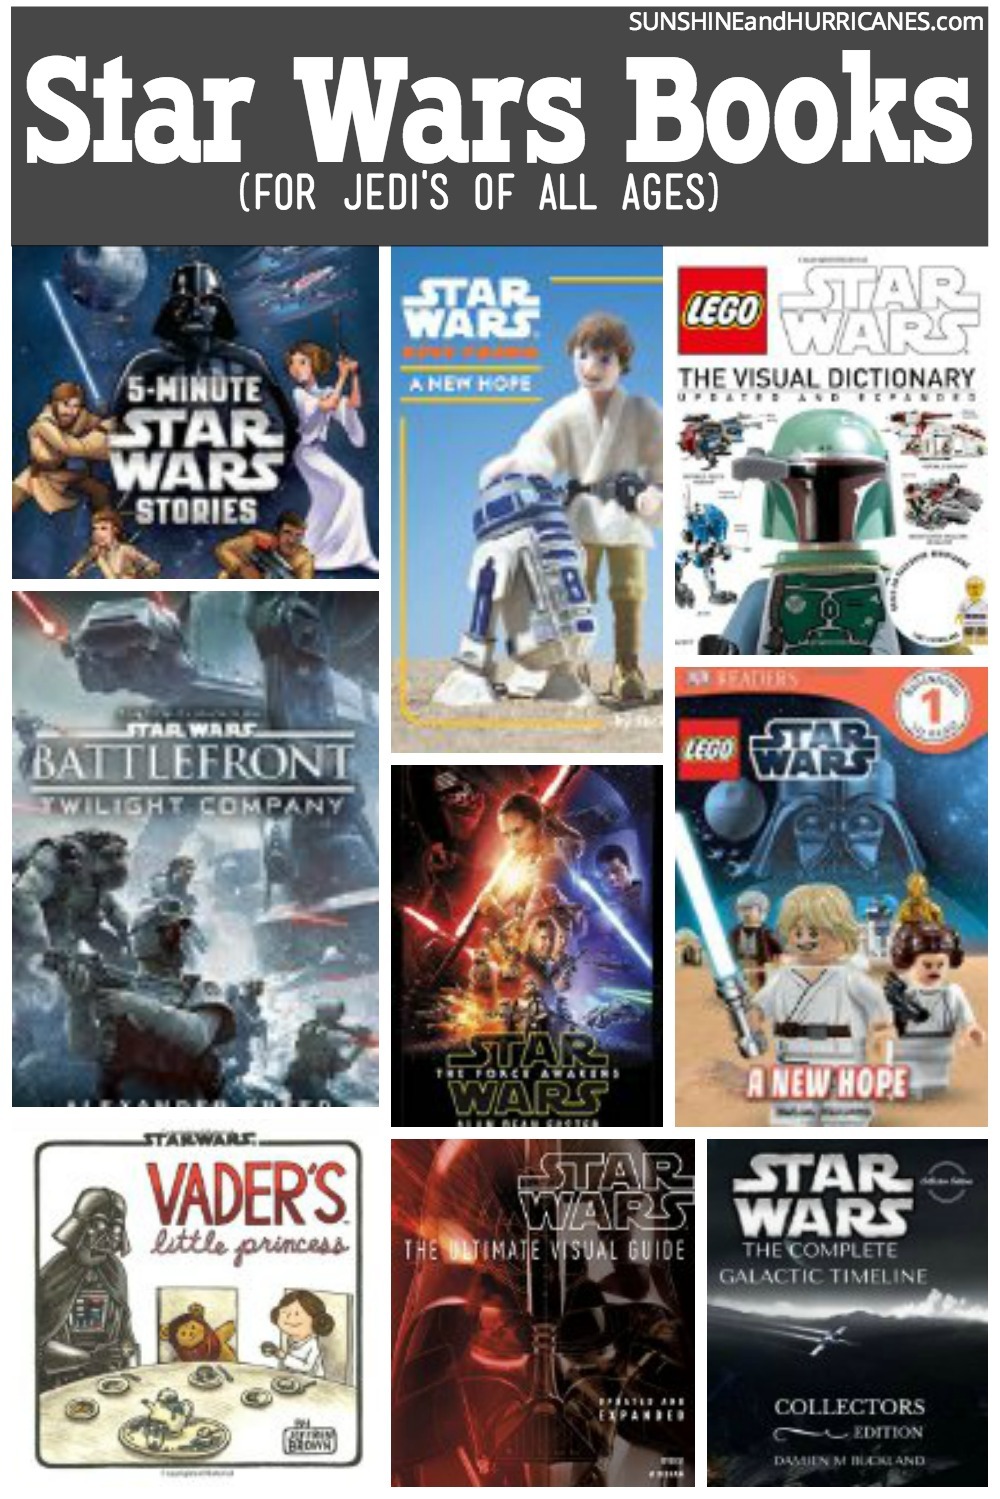 Do you have Star Wars fans from young to old in your family? There are tons of great Star Wars books for all ages! Inspire a beginning reader or help establish a love of reading in kids (and adults) with exciting stories of Jedi rebels and followers of the dark side. Star Wars Books by SunshineandHurricanes.com